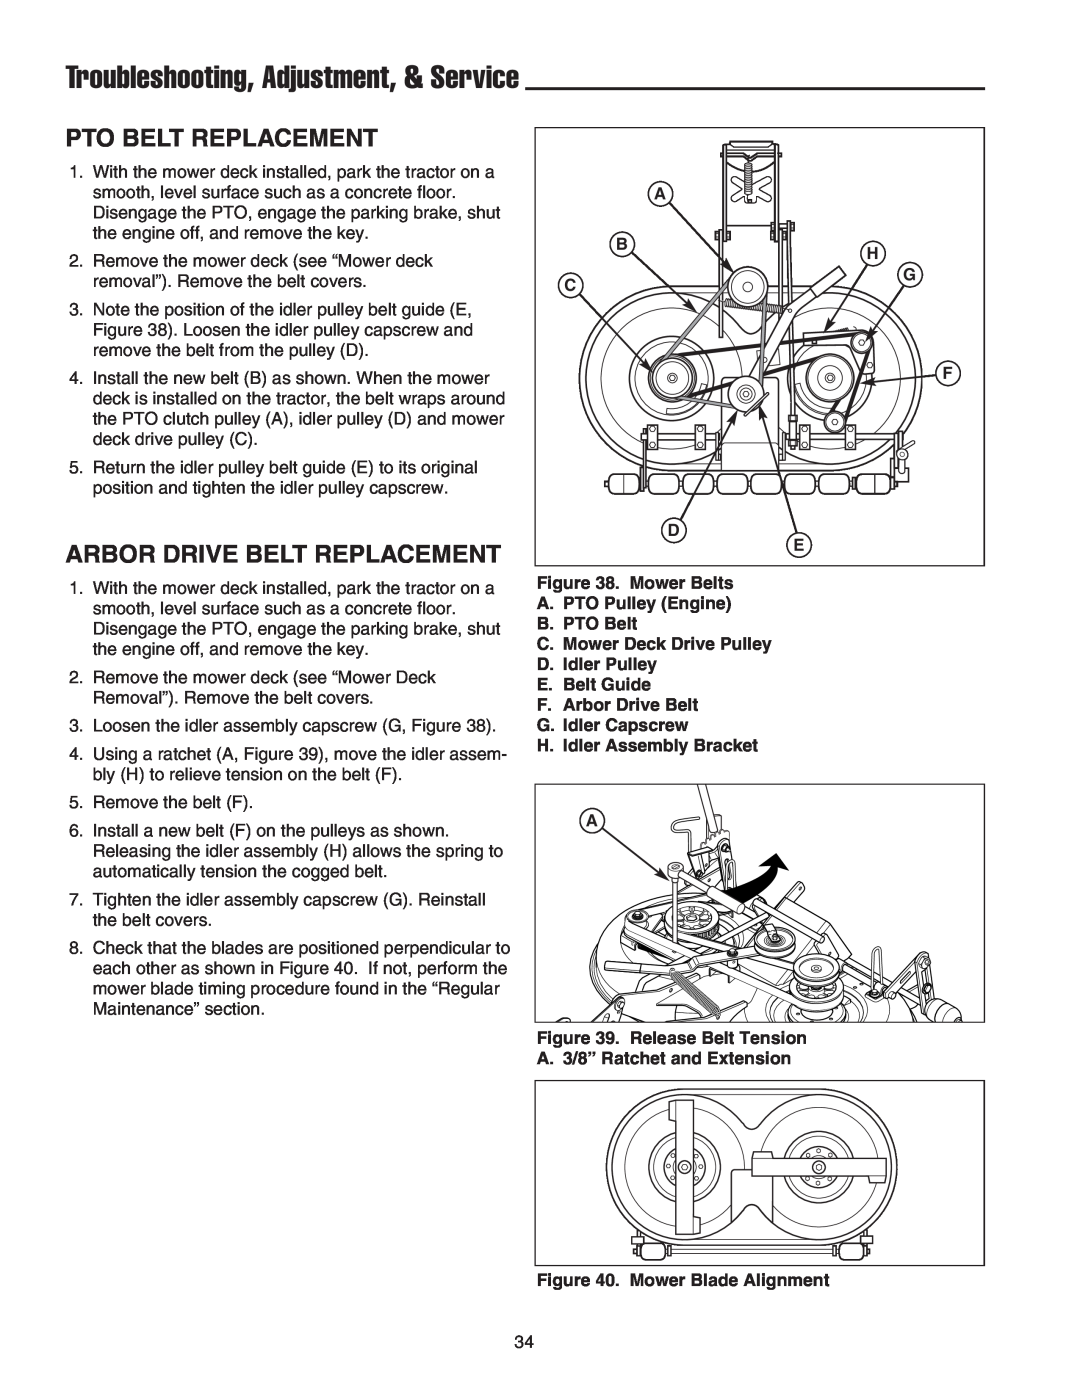 Snapper 2400 XL manual Pto Belt Replacement, Arbor Drive Belt Replacement, Troubleshooting, Adjustment, & Service 